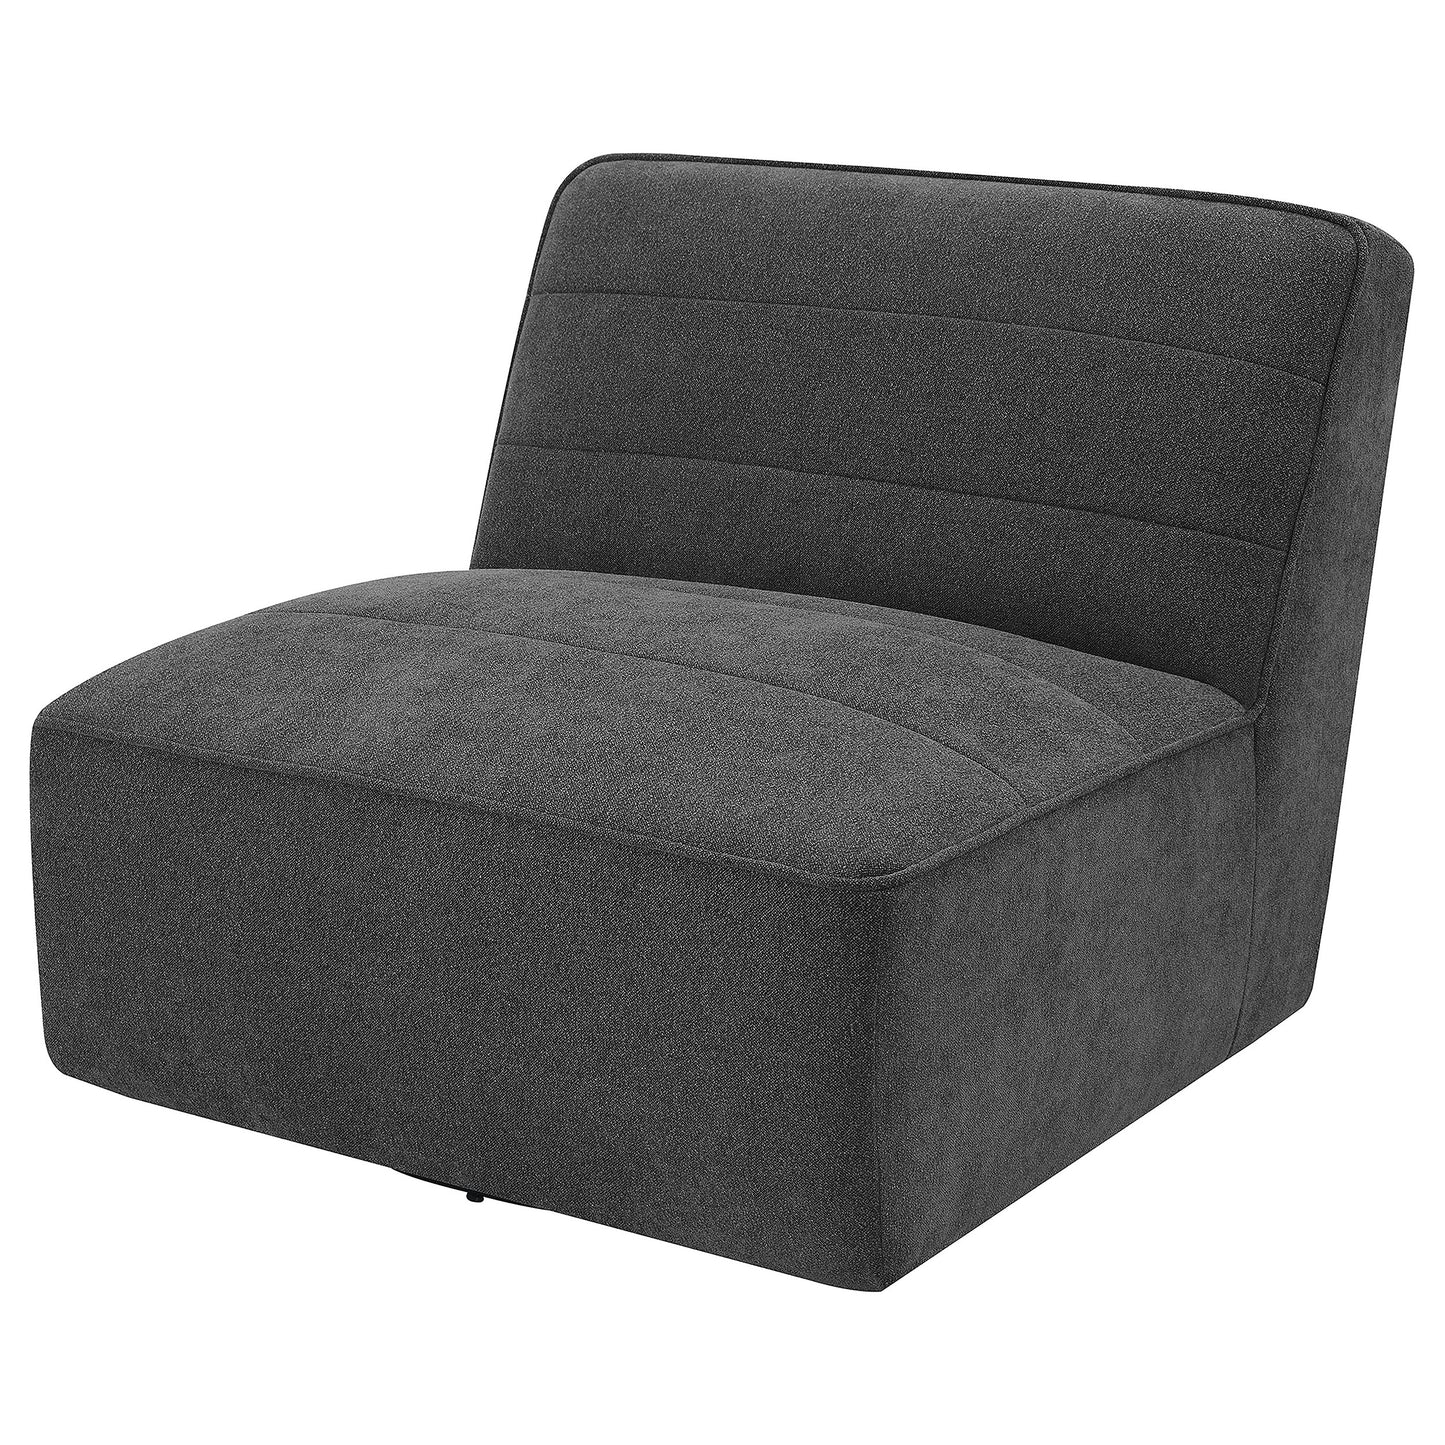 Cobie Upholstered Swivel Armless Chair Dark Charcoal